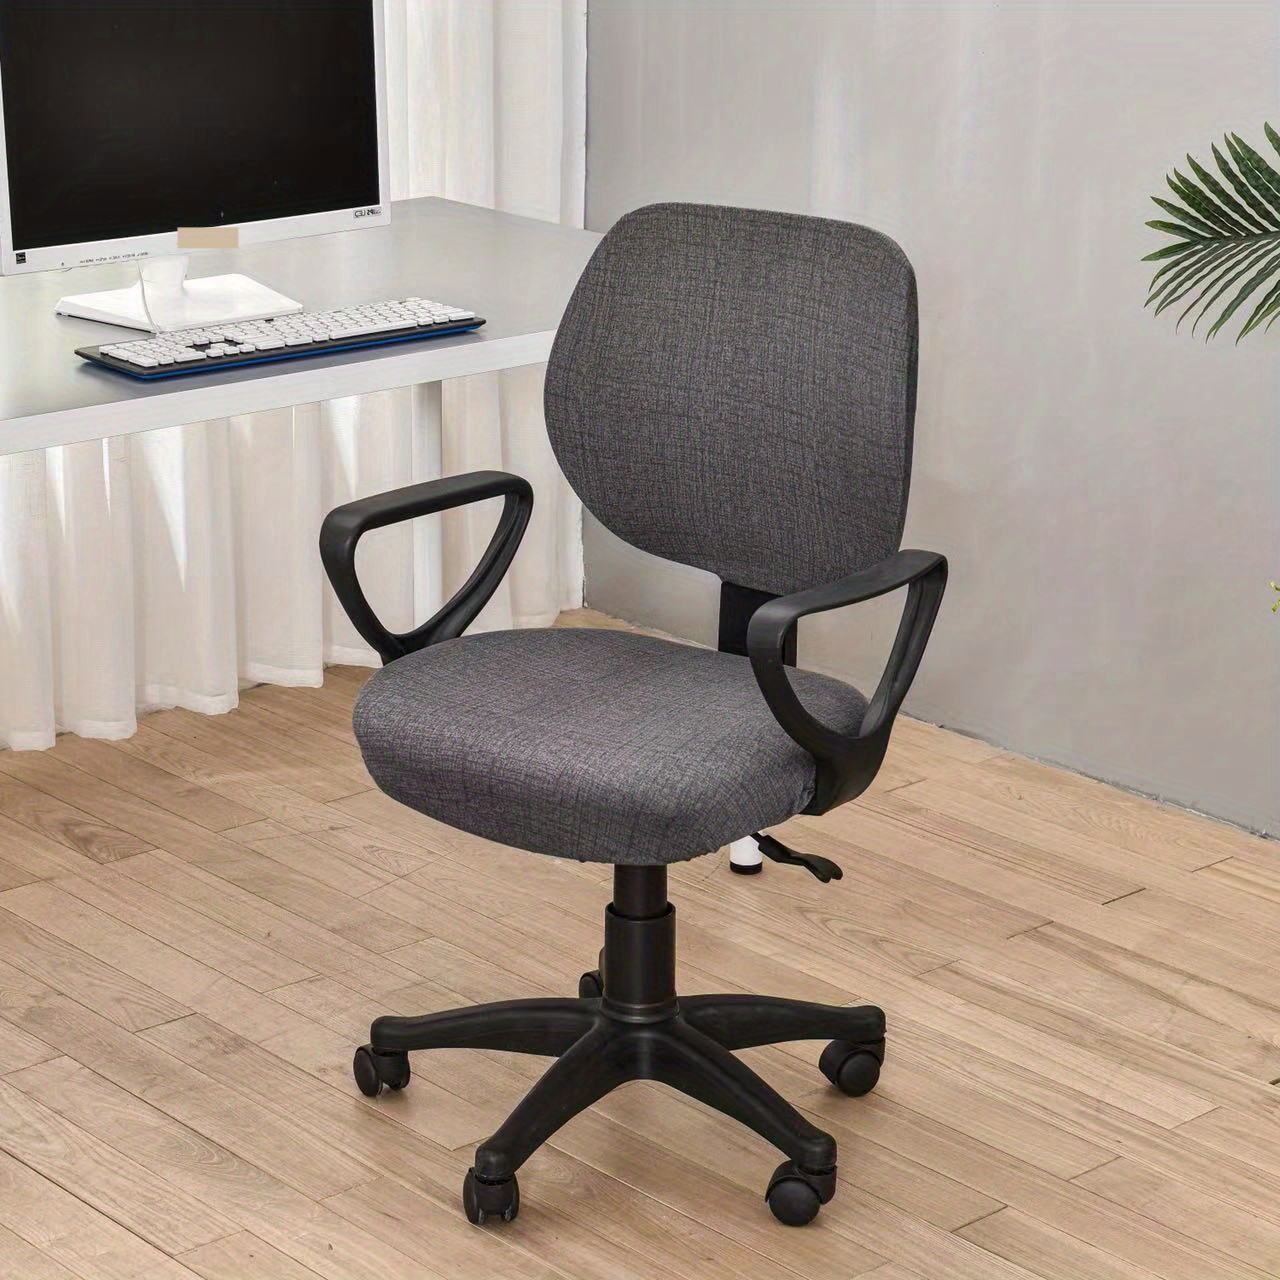 Sunnyway PU Leather Office Chair Cover Waterproof Desk Chair Cover Set  Stretchable Elastic Soft Computer Chair Cover Slipcover Kitchen Chair Seat